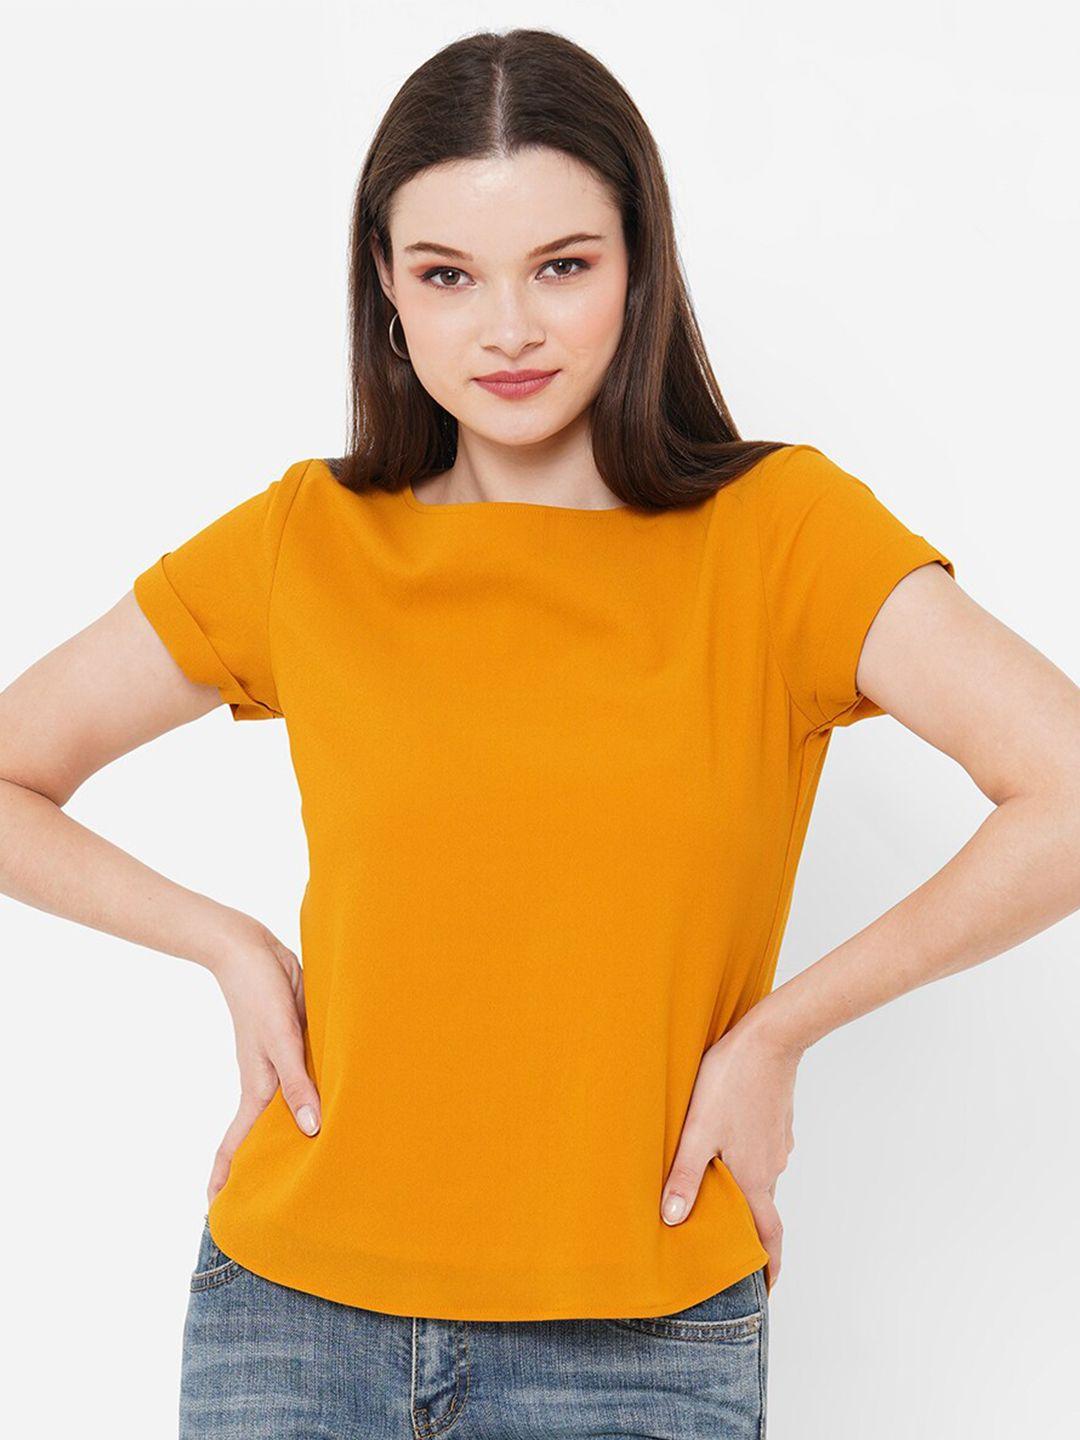 mish mustard yellow boat neck georgette top